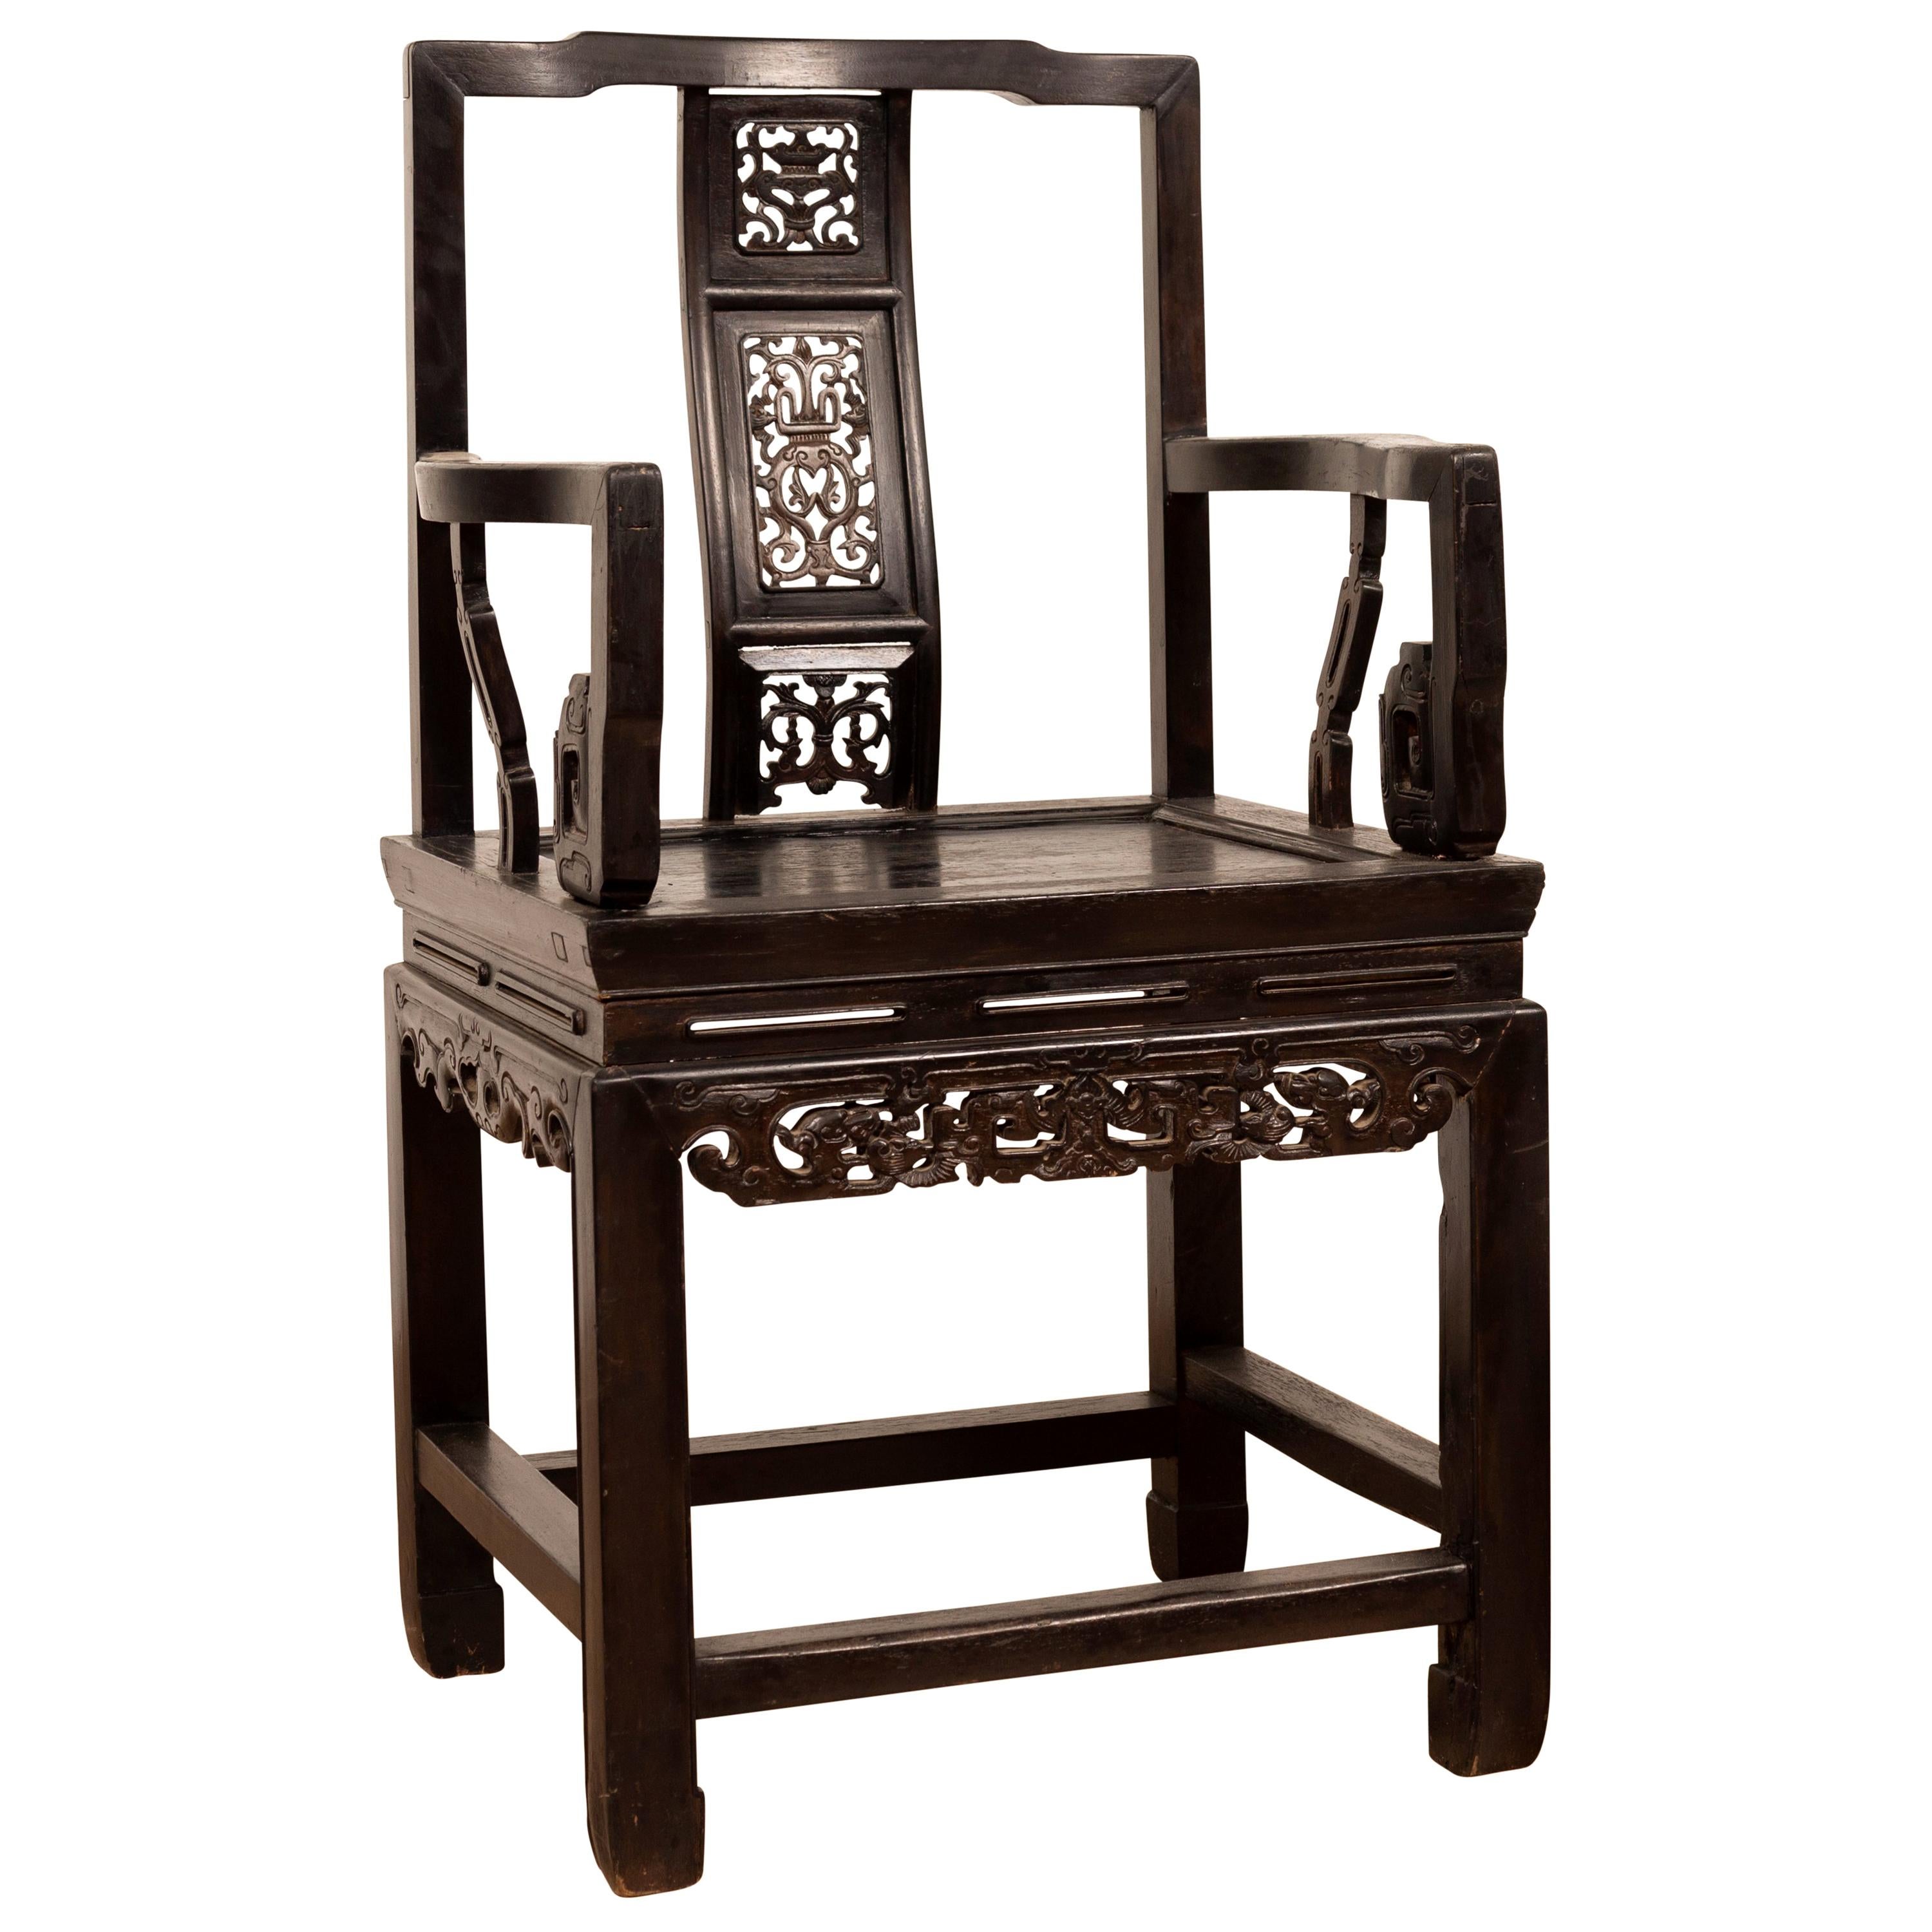 Chinese Wedding Chair with Curvy Pierced Splat, Serpentine Arms and Dark Patina